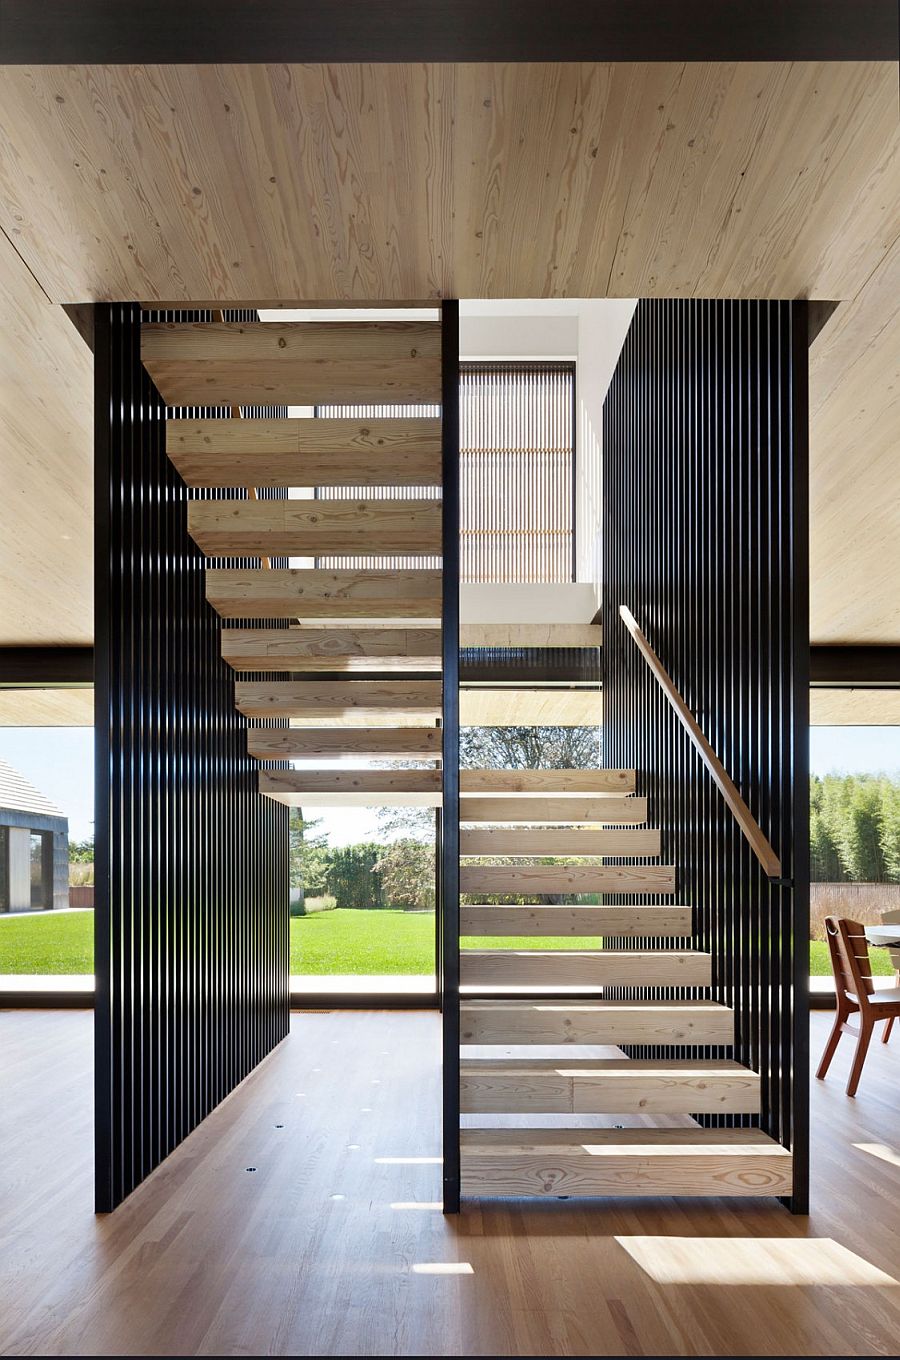 Sculptural steel and wooden staircase of the barn-style home